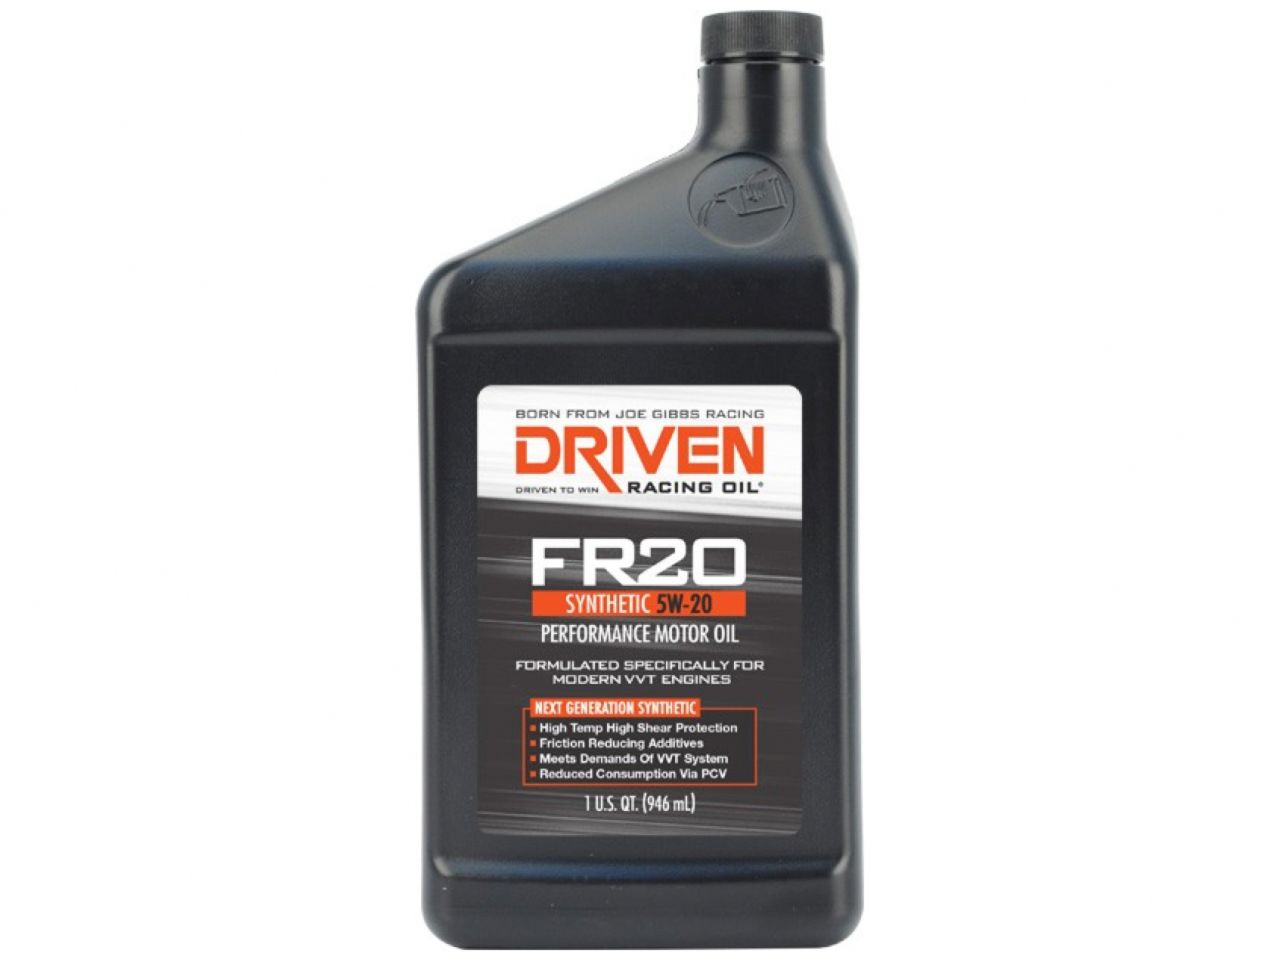 Driven Racing Oil Engine Oil 03006 Item Image